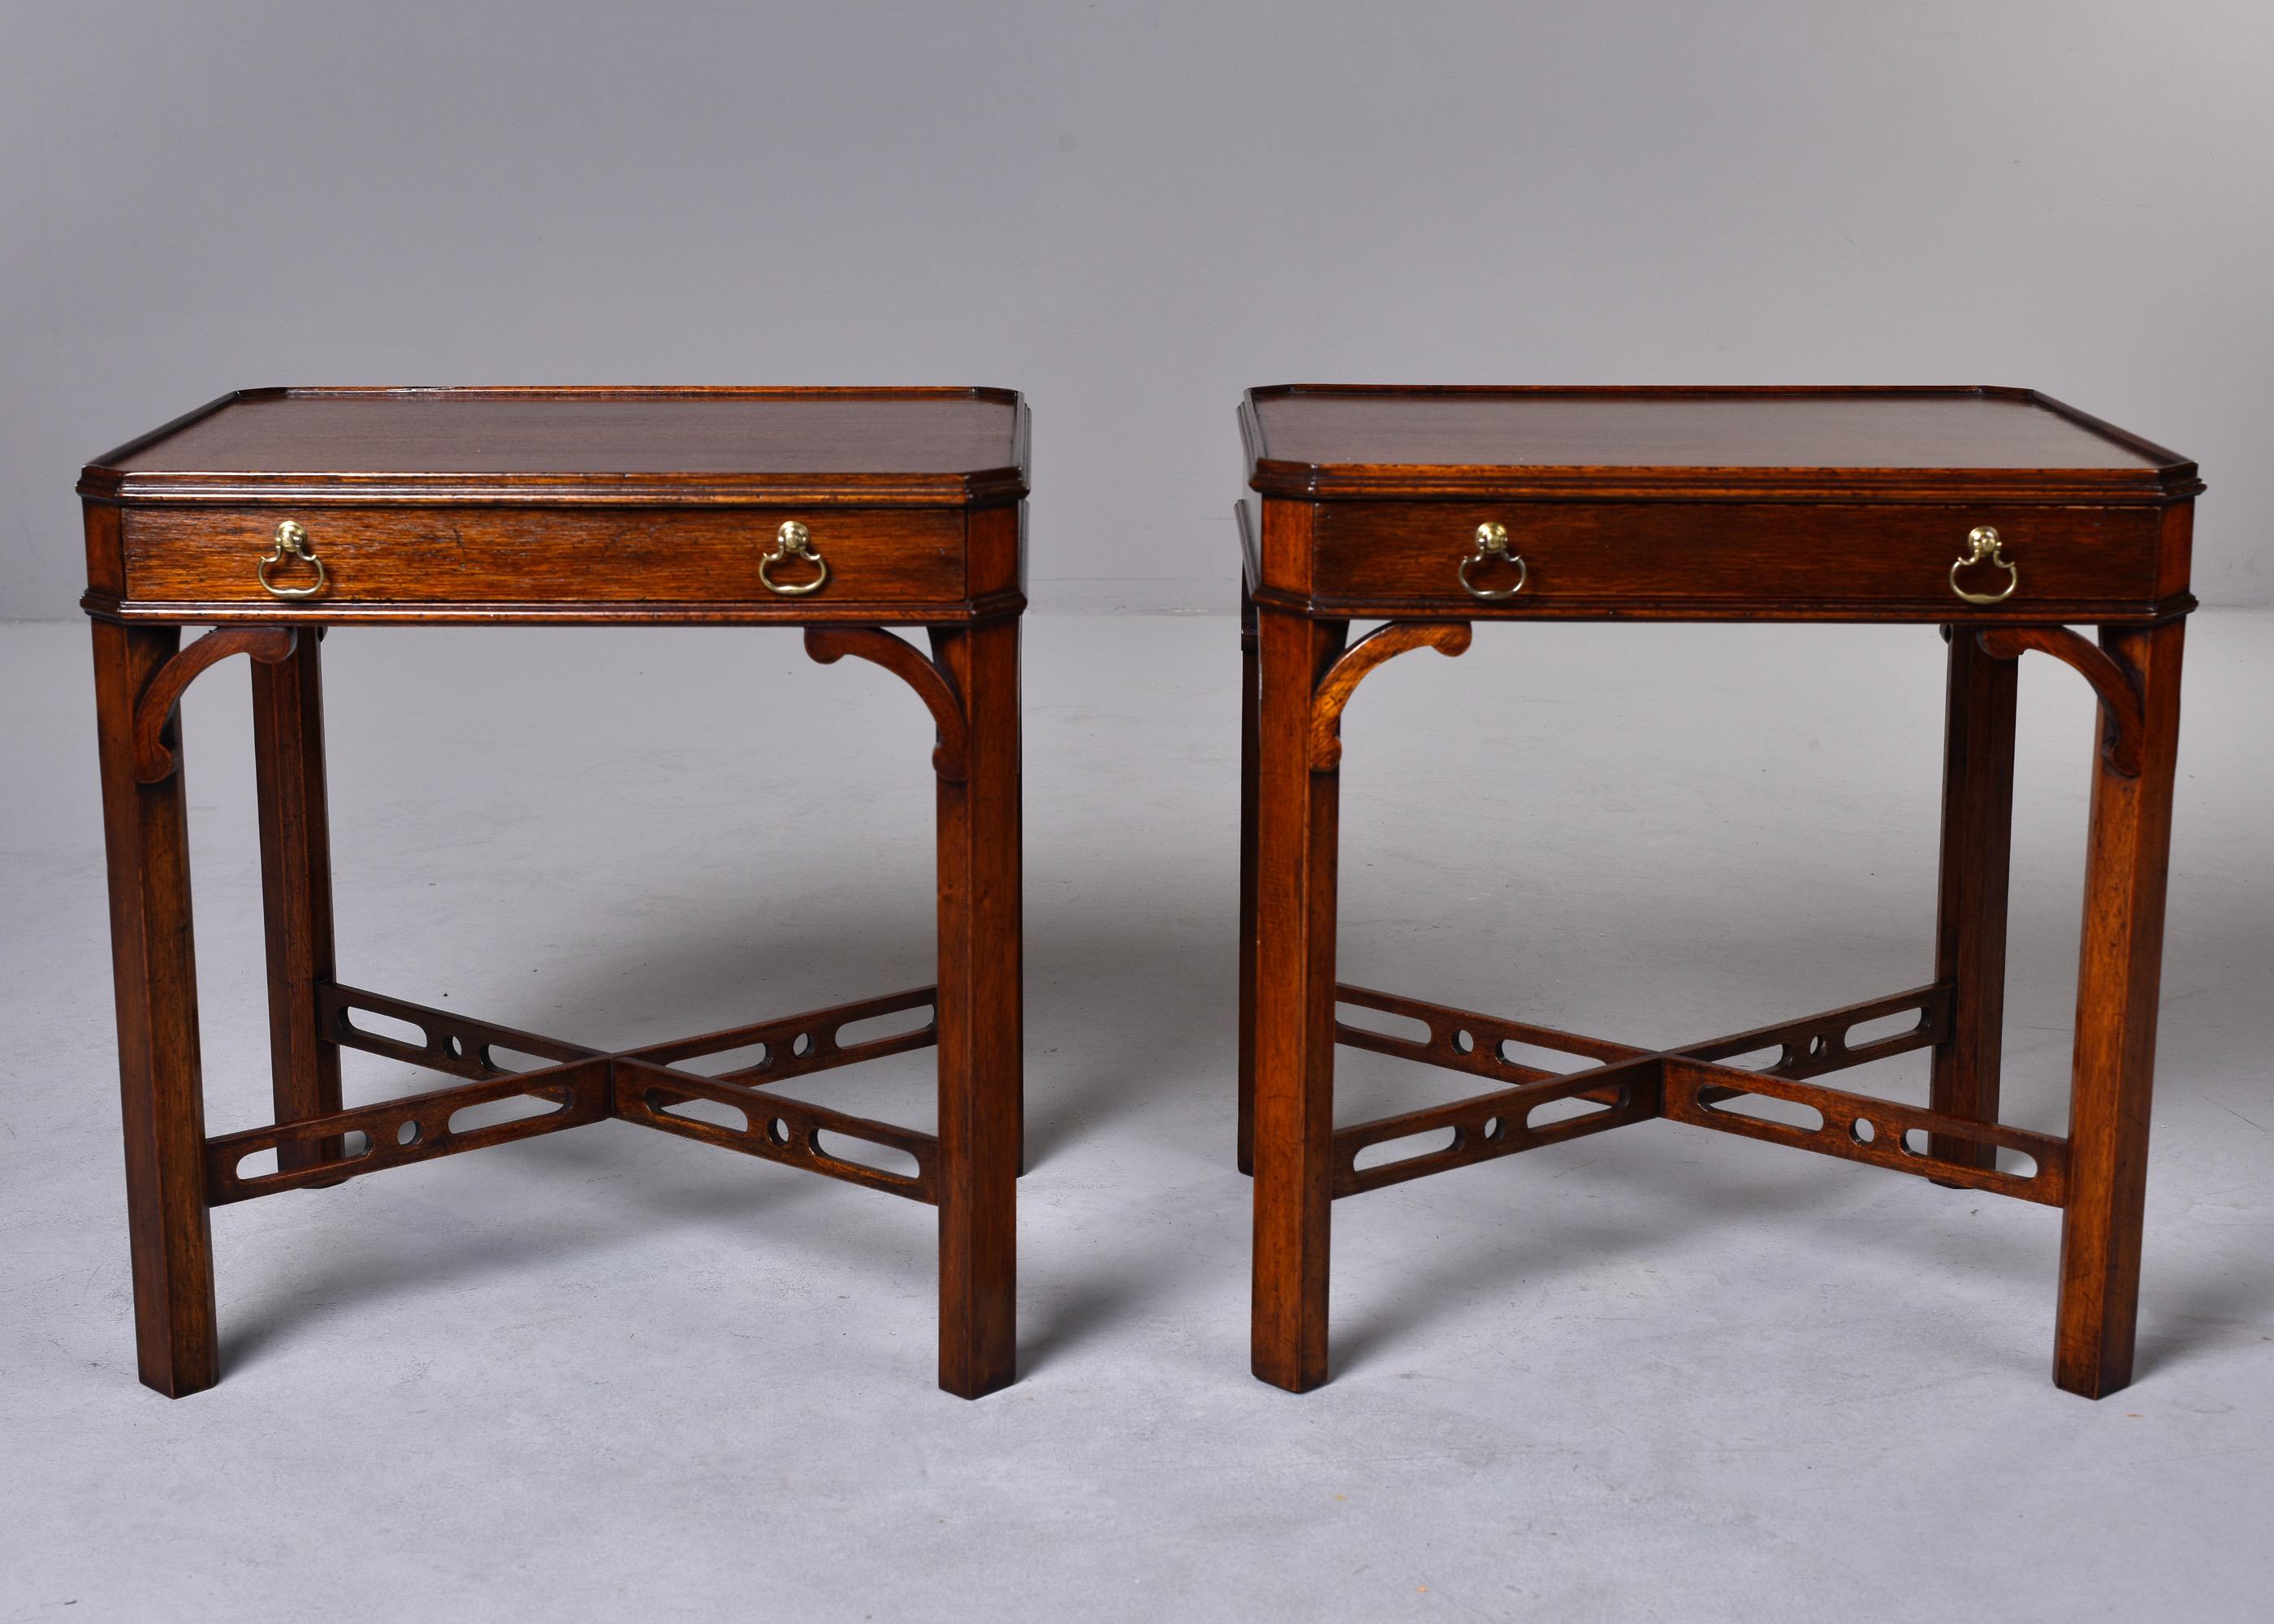 Found in England, this pair of Regency style circa 1920s mahogany side tables each have a single functional drawer and open work x-form stretchers. Unknown maker. Very good antique condition.